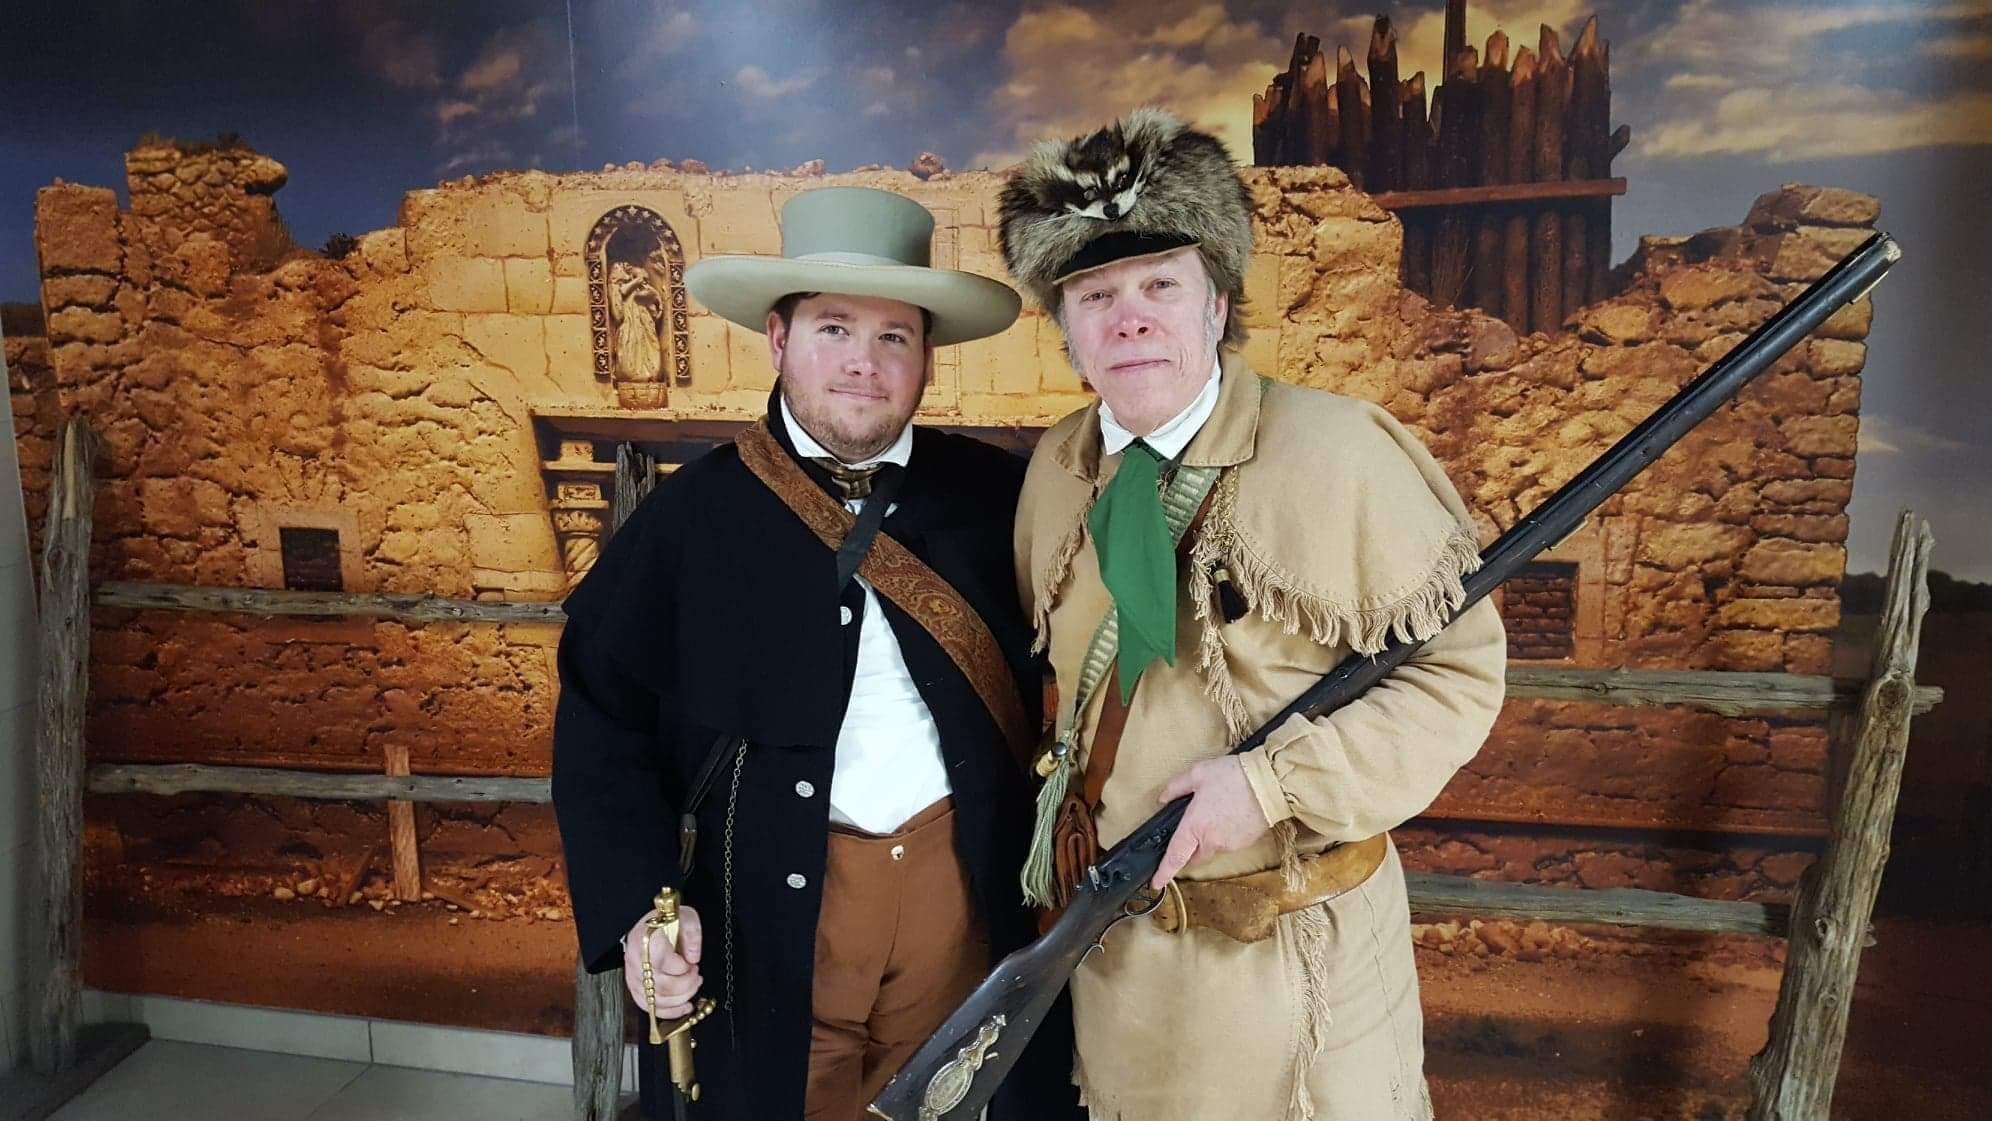 Two men dressed in historic clothing stand in front of a painted mural